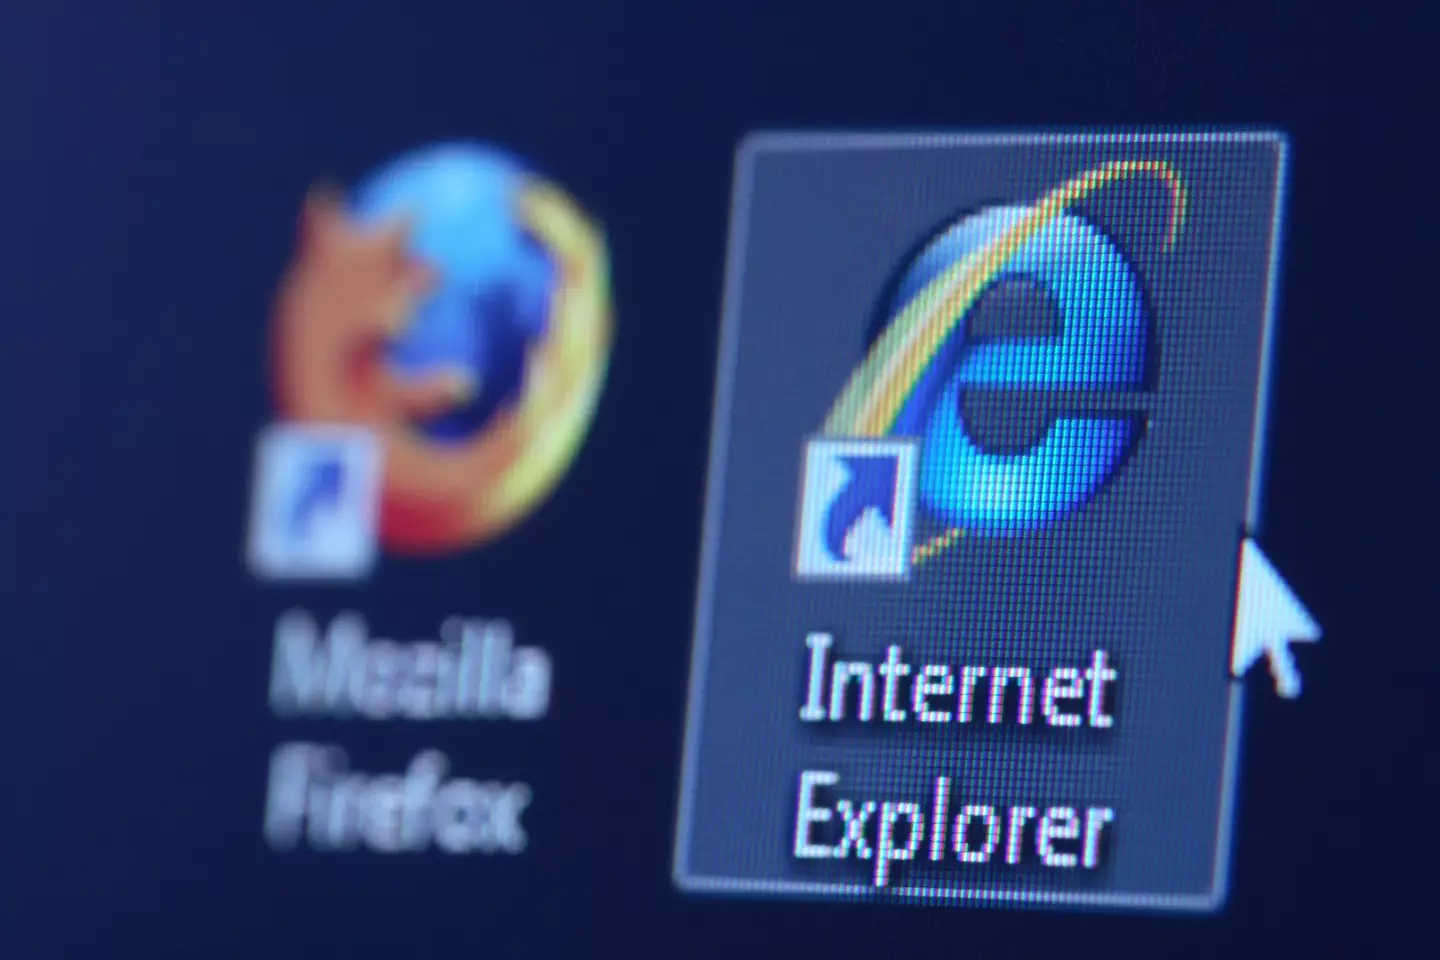 Internet Explorer once facilitated almost all internet traffic.